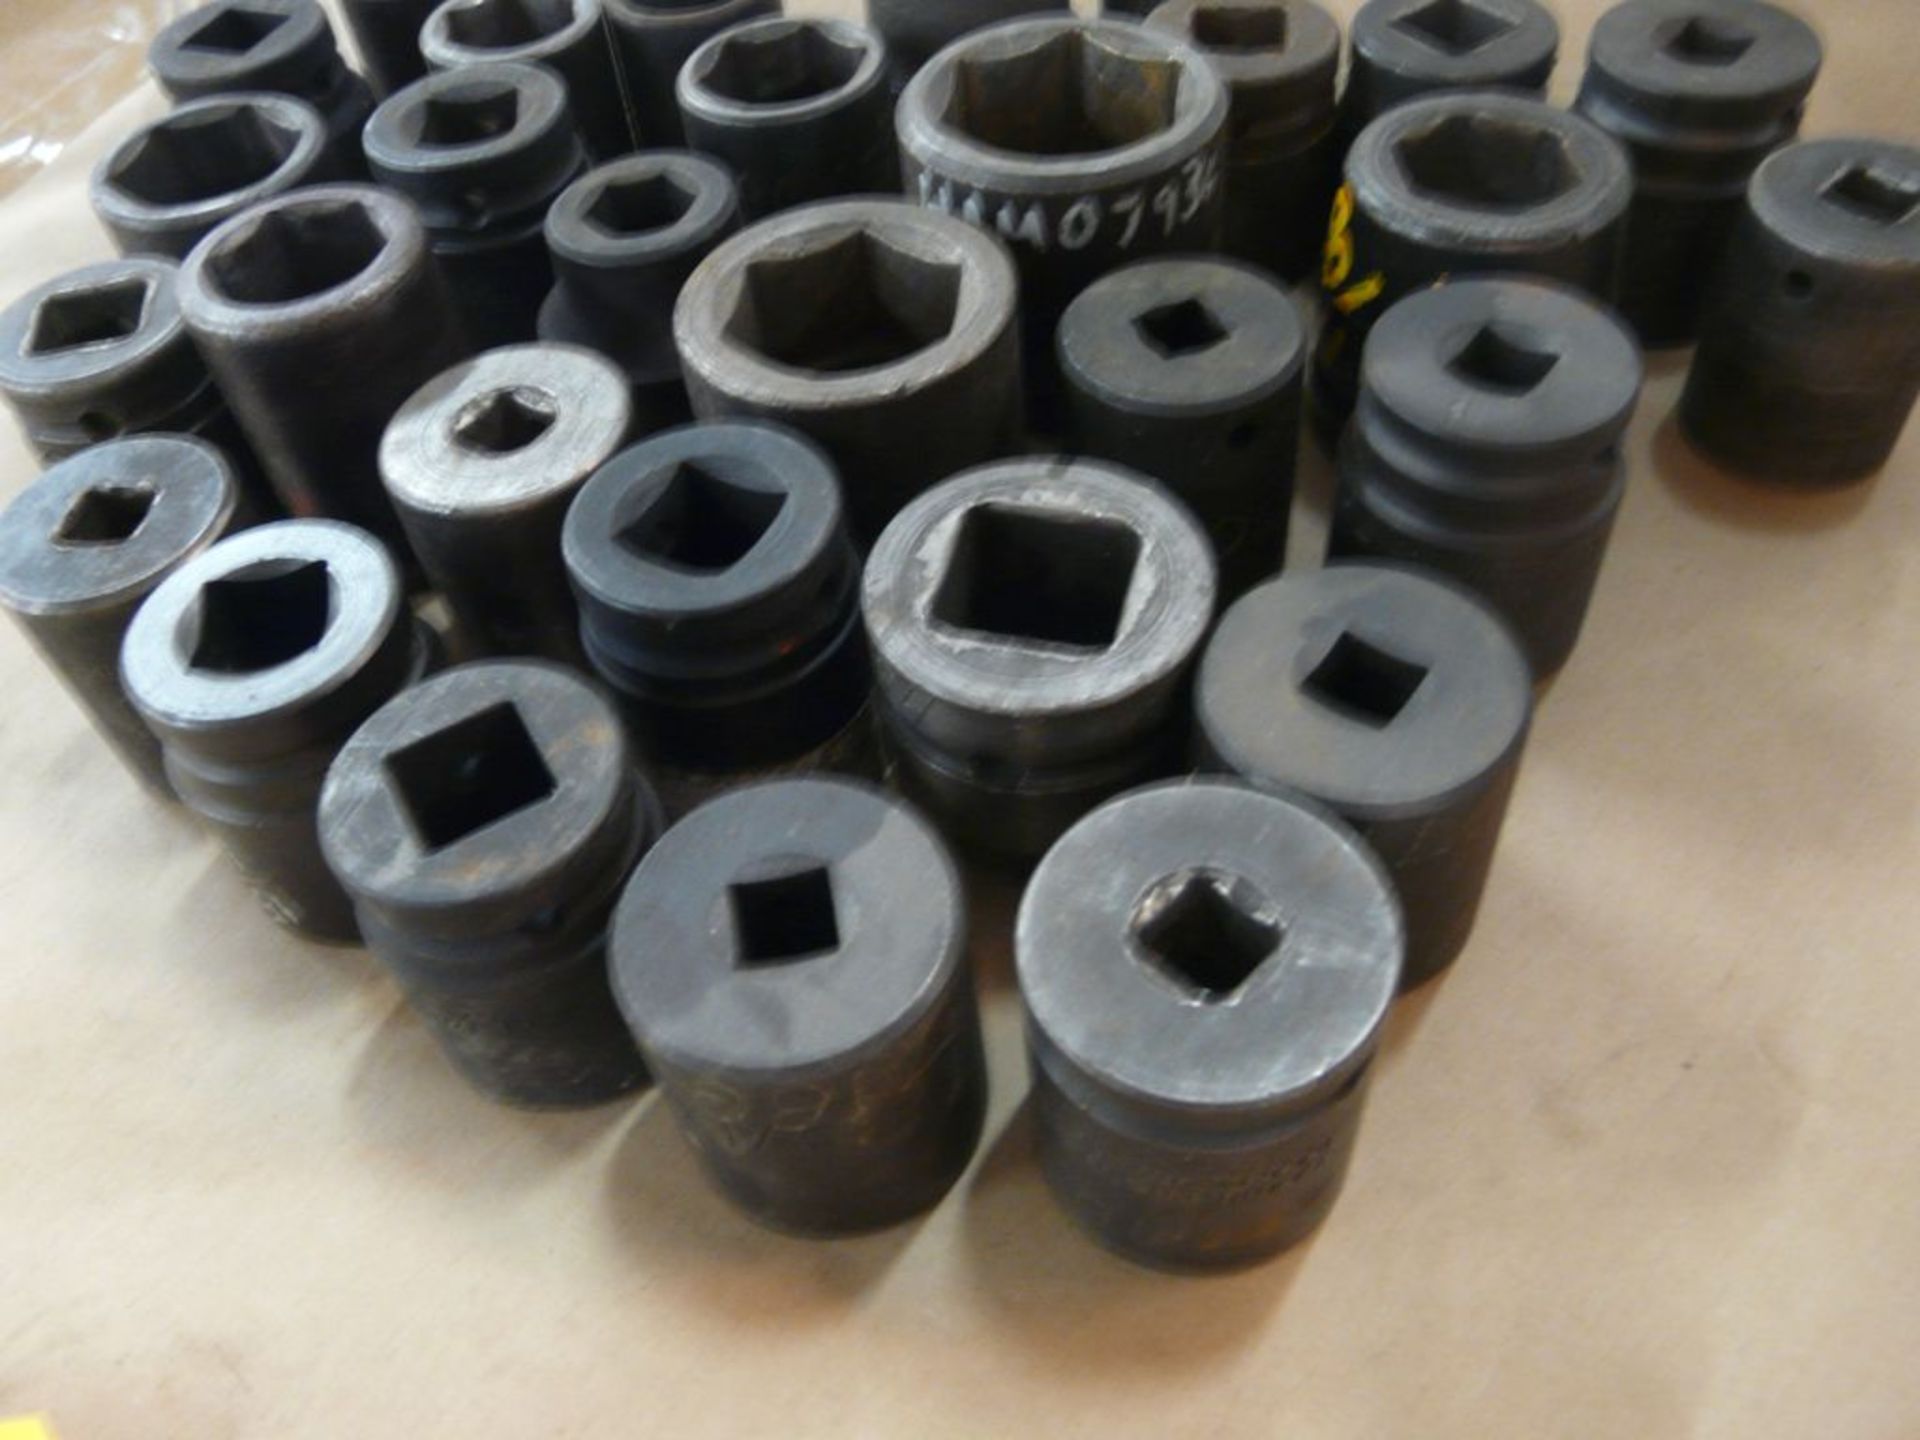 Lot of (30) Heavy Duty Sockets - Drive Sizes Include: 1"; 1/2"; 5/8"; Tag: 214946 - Image 6 of 6